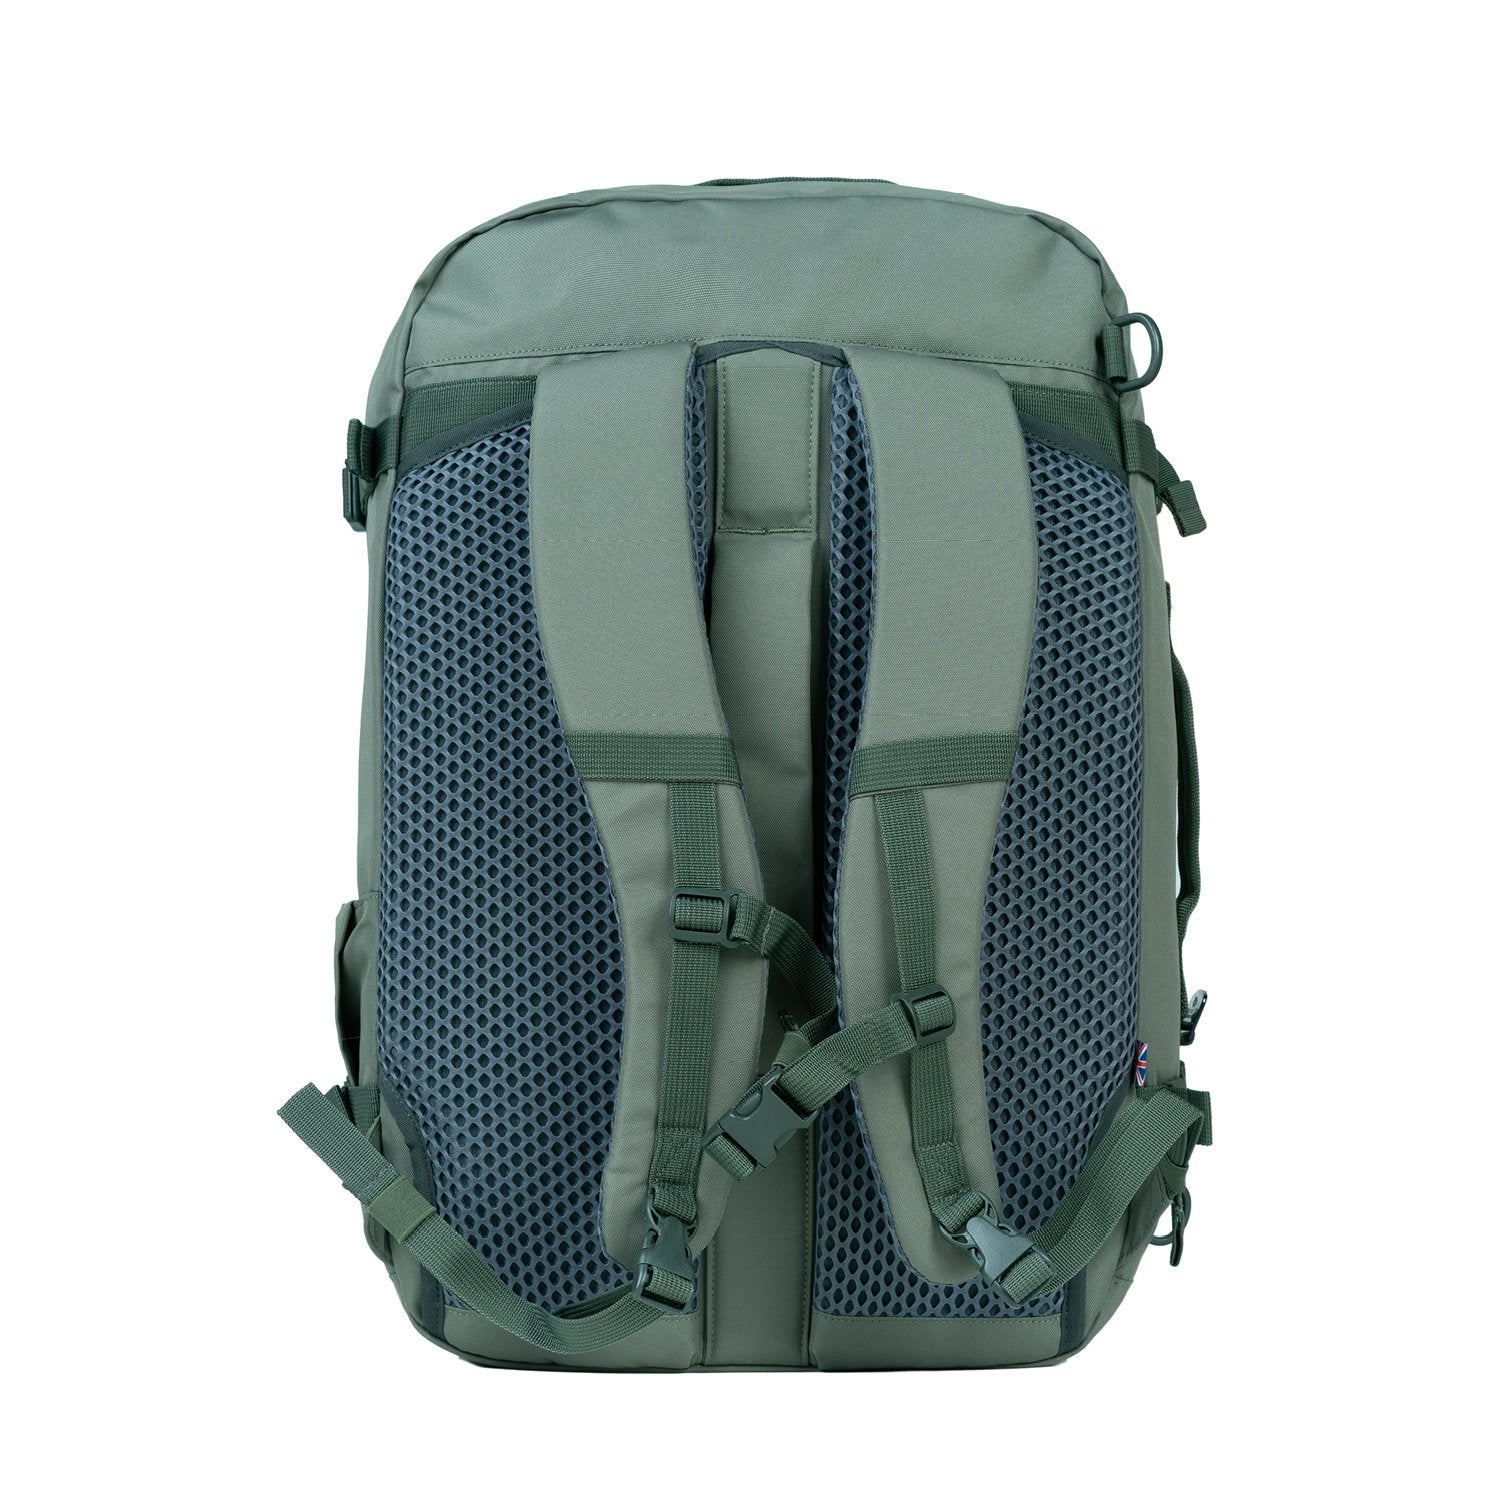 CabinZero Classic Travel Backpack Review